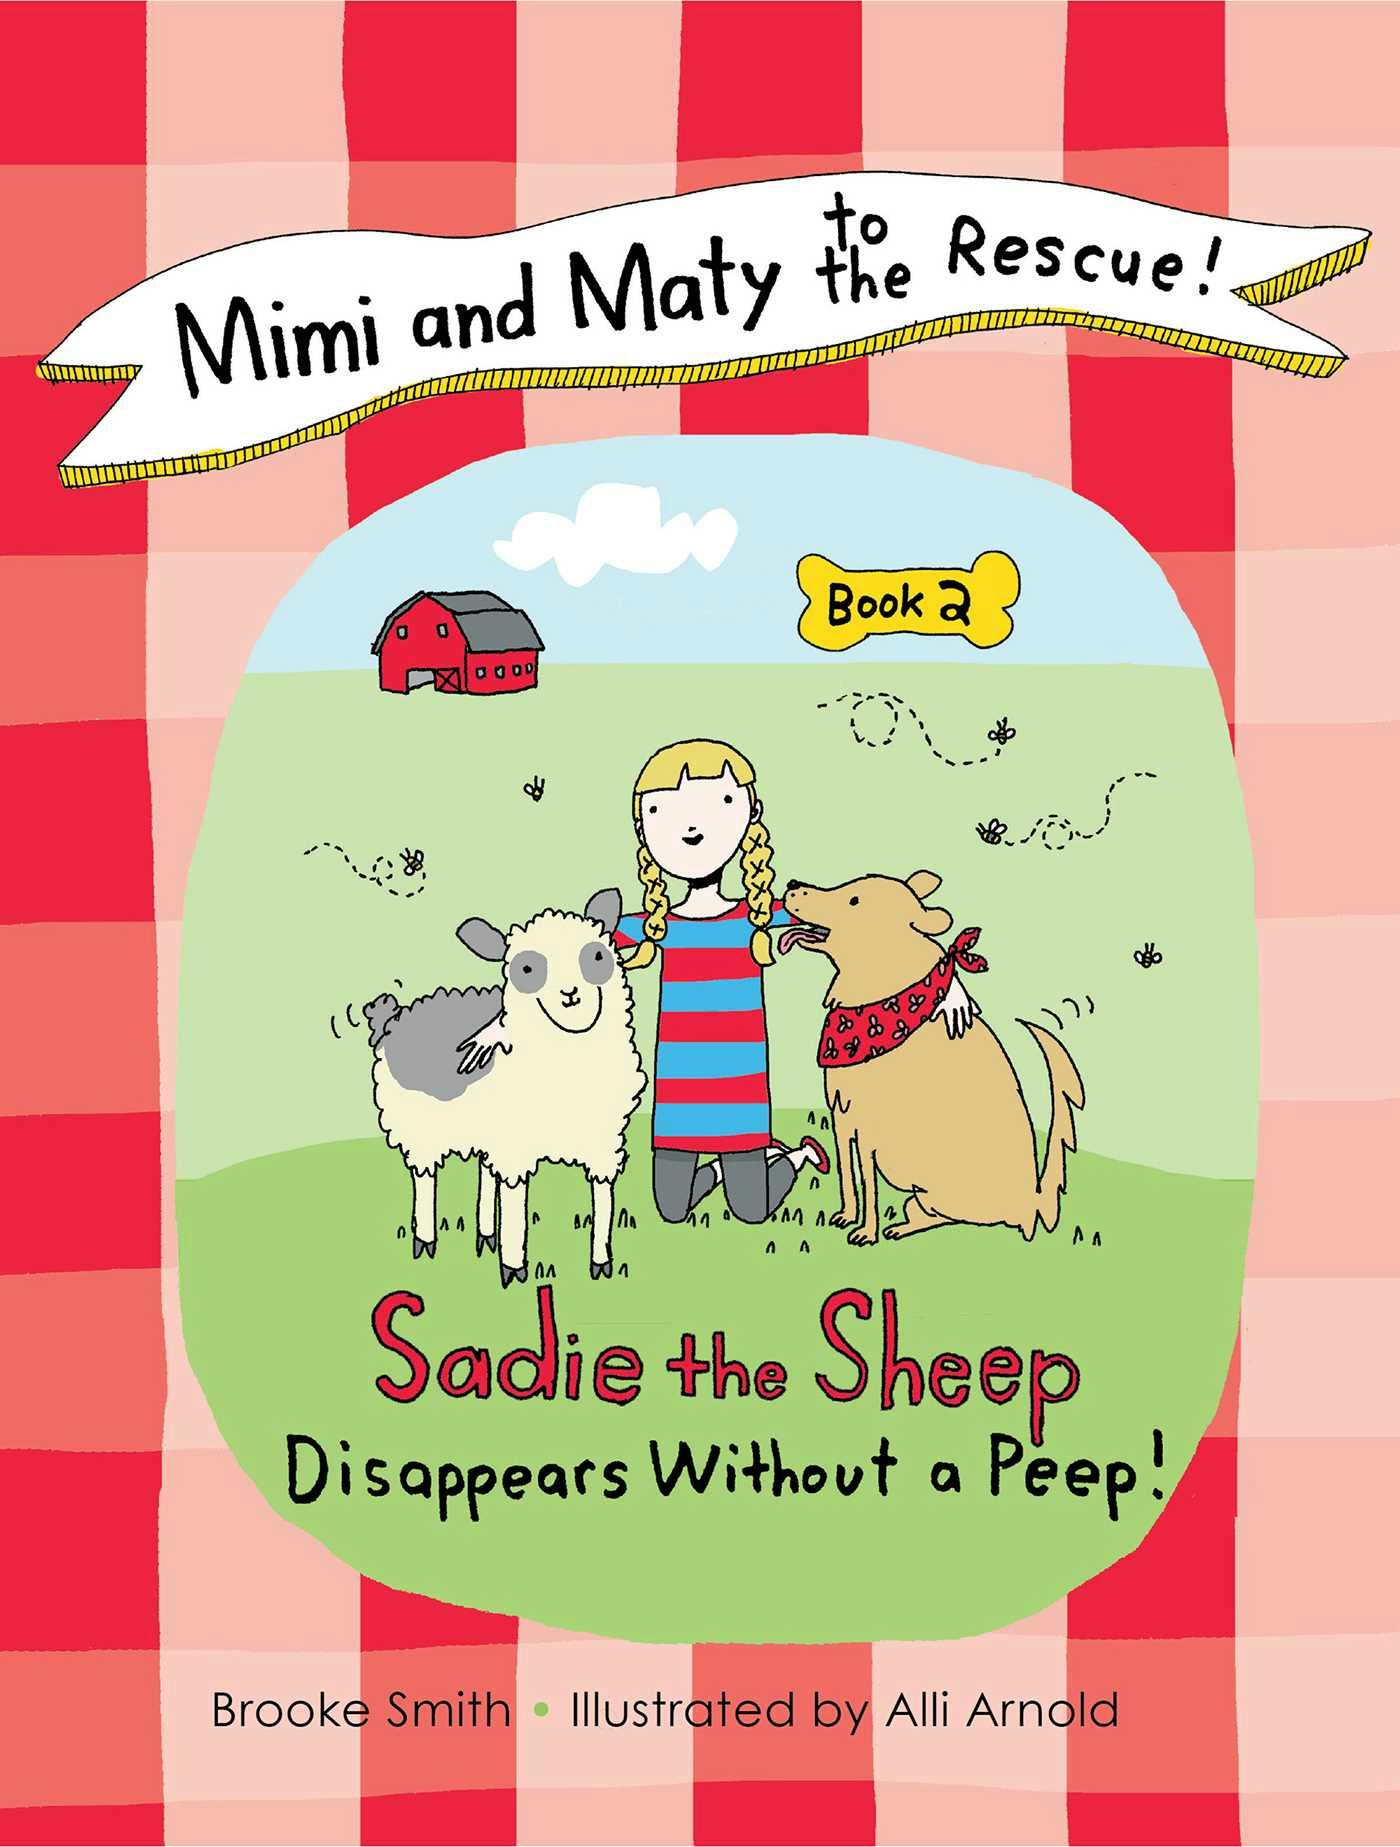 Mimi and Maty to the Rescue!: Book 2: Sadie the Sheep Disappears Without a Peep! - undefined